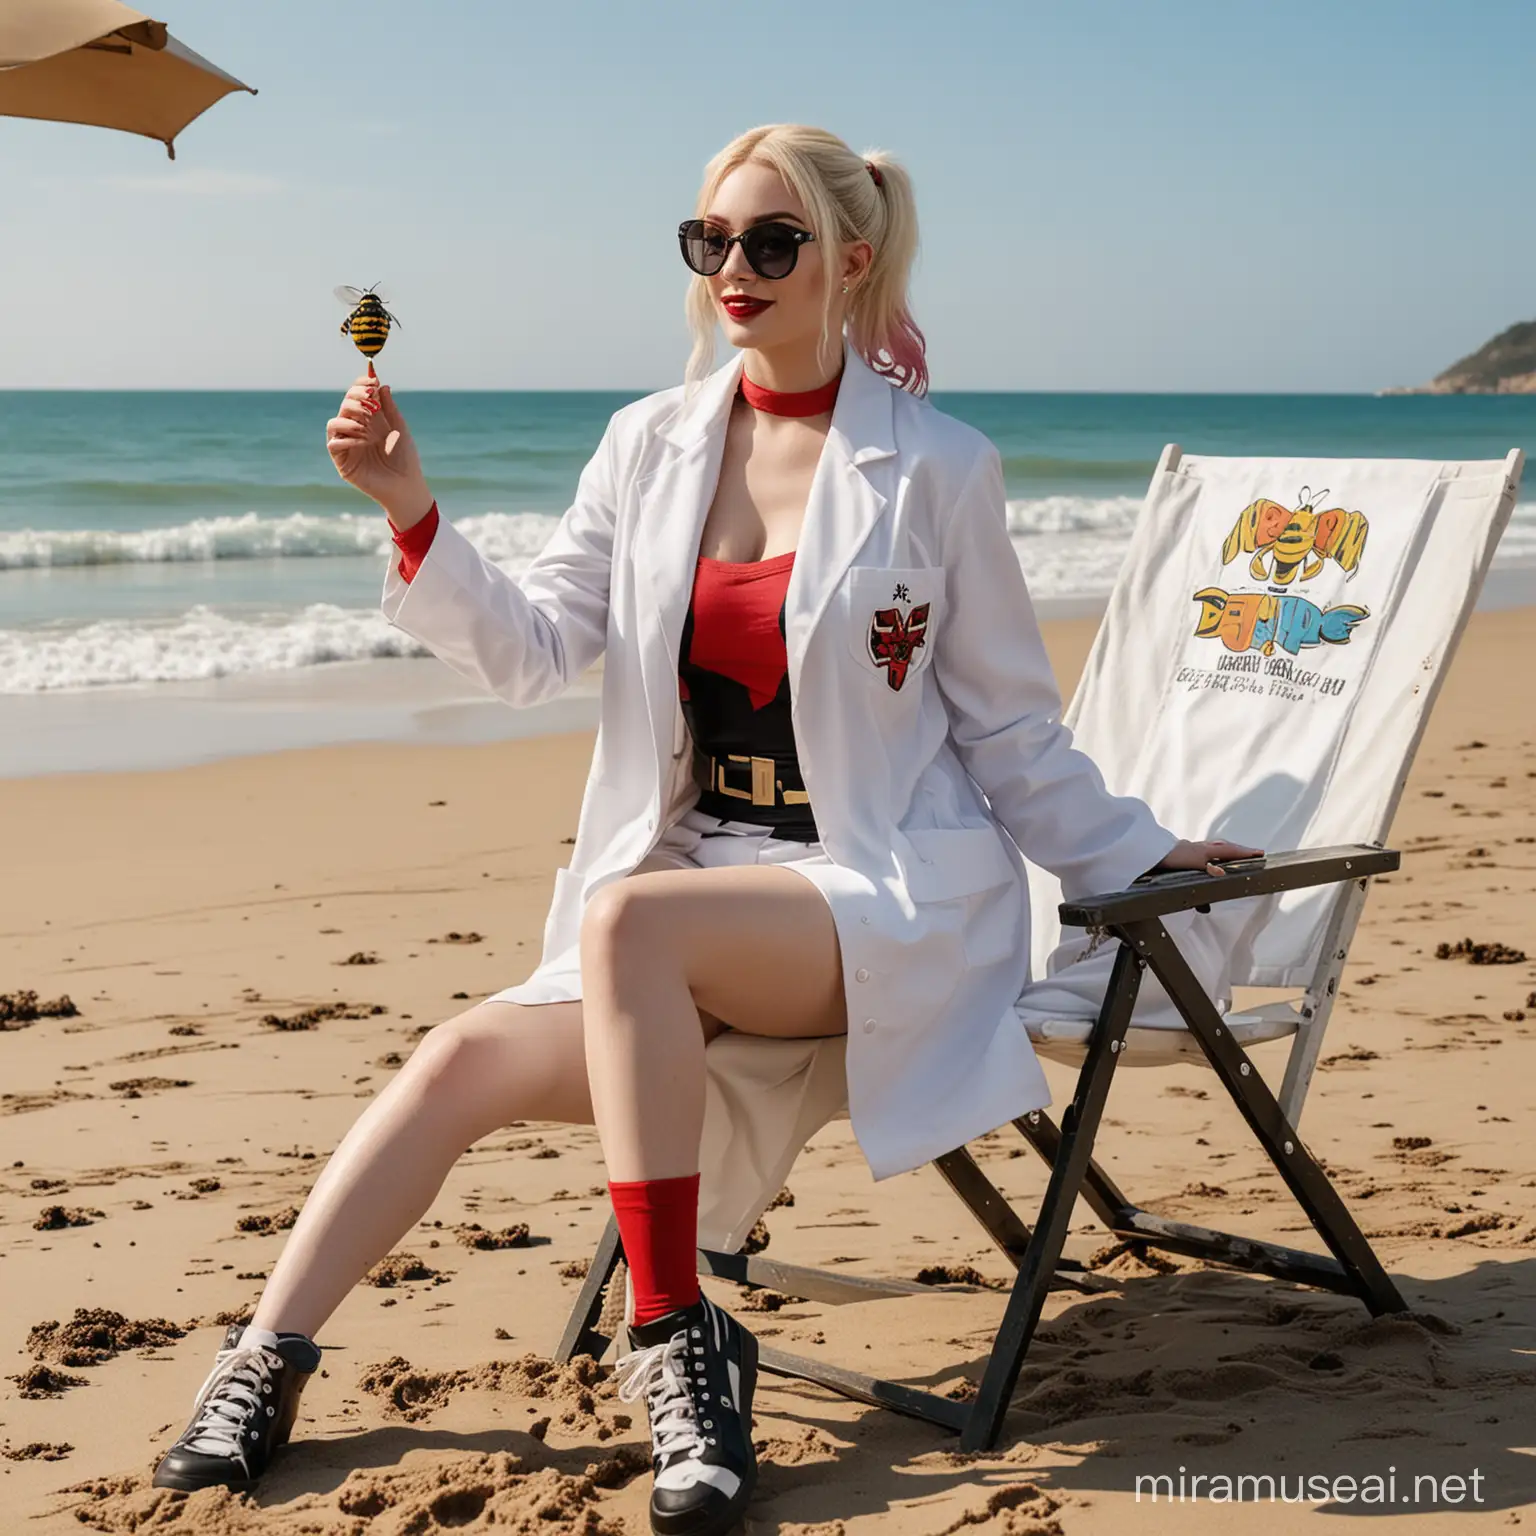 Harley quinn sitting on a beach chair wearing a long white lab coat while trying to swat a bee away with one hand and making Italian symbol for understand with the other hand full body view